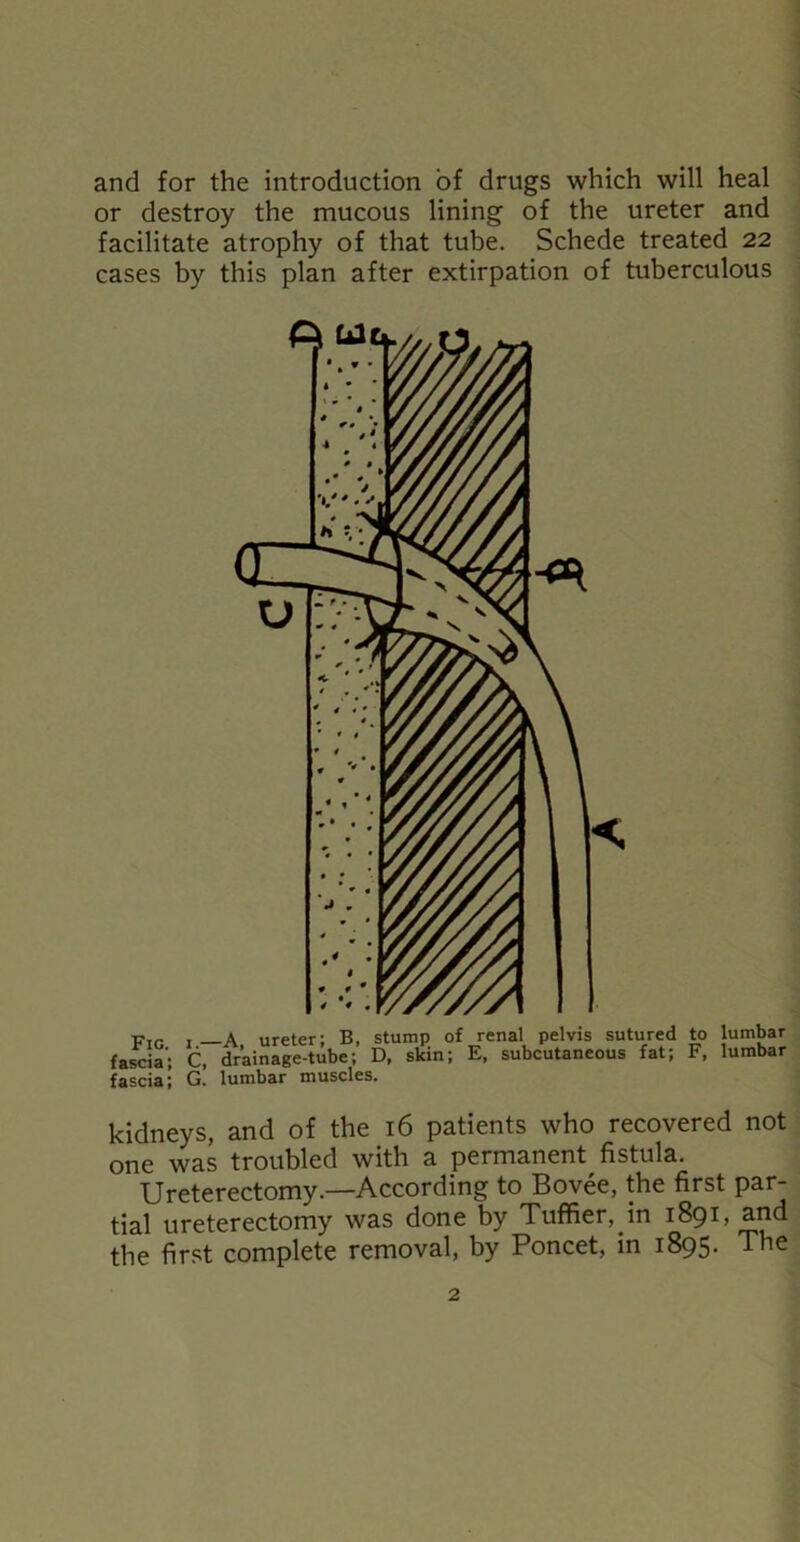 and for the introduction of drugs which will heal or destroy the mucous lining of the ureter and facilitate atrophy of that tube. Schede treated 22 cases by this plan after extirpation of tuberculous Fig , _a, ureter; B, stump of renal pelvis sutured to lumbar fascia'; C, drainage-tube; D, skin; E, subcutaneous fat; F, lumbar fascist \ G. lumbar muscles. kidneys, and of the 16 patients who recovered not one was troubled with a permanent fistula. Ureterectomy.—According to Bovee, the first par- tial ureterectomy was done by Tuffier, in 1891, and the first complete removal, by Poncet, in 1895. The